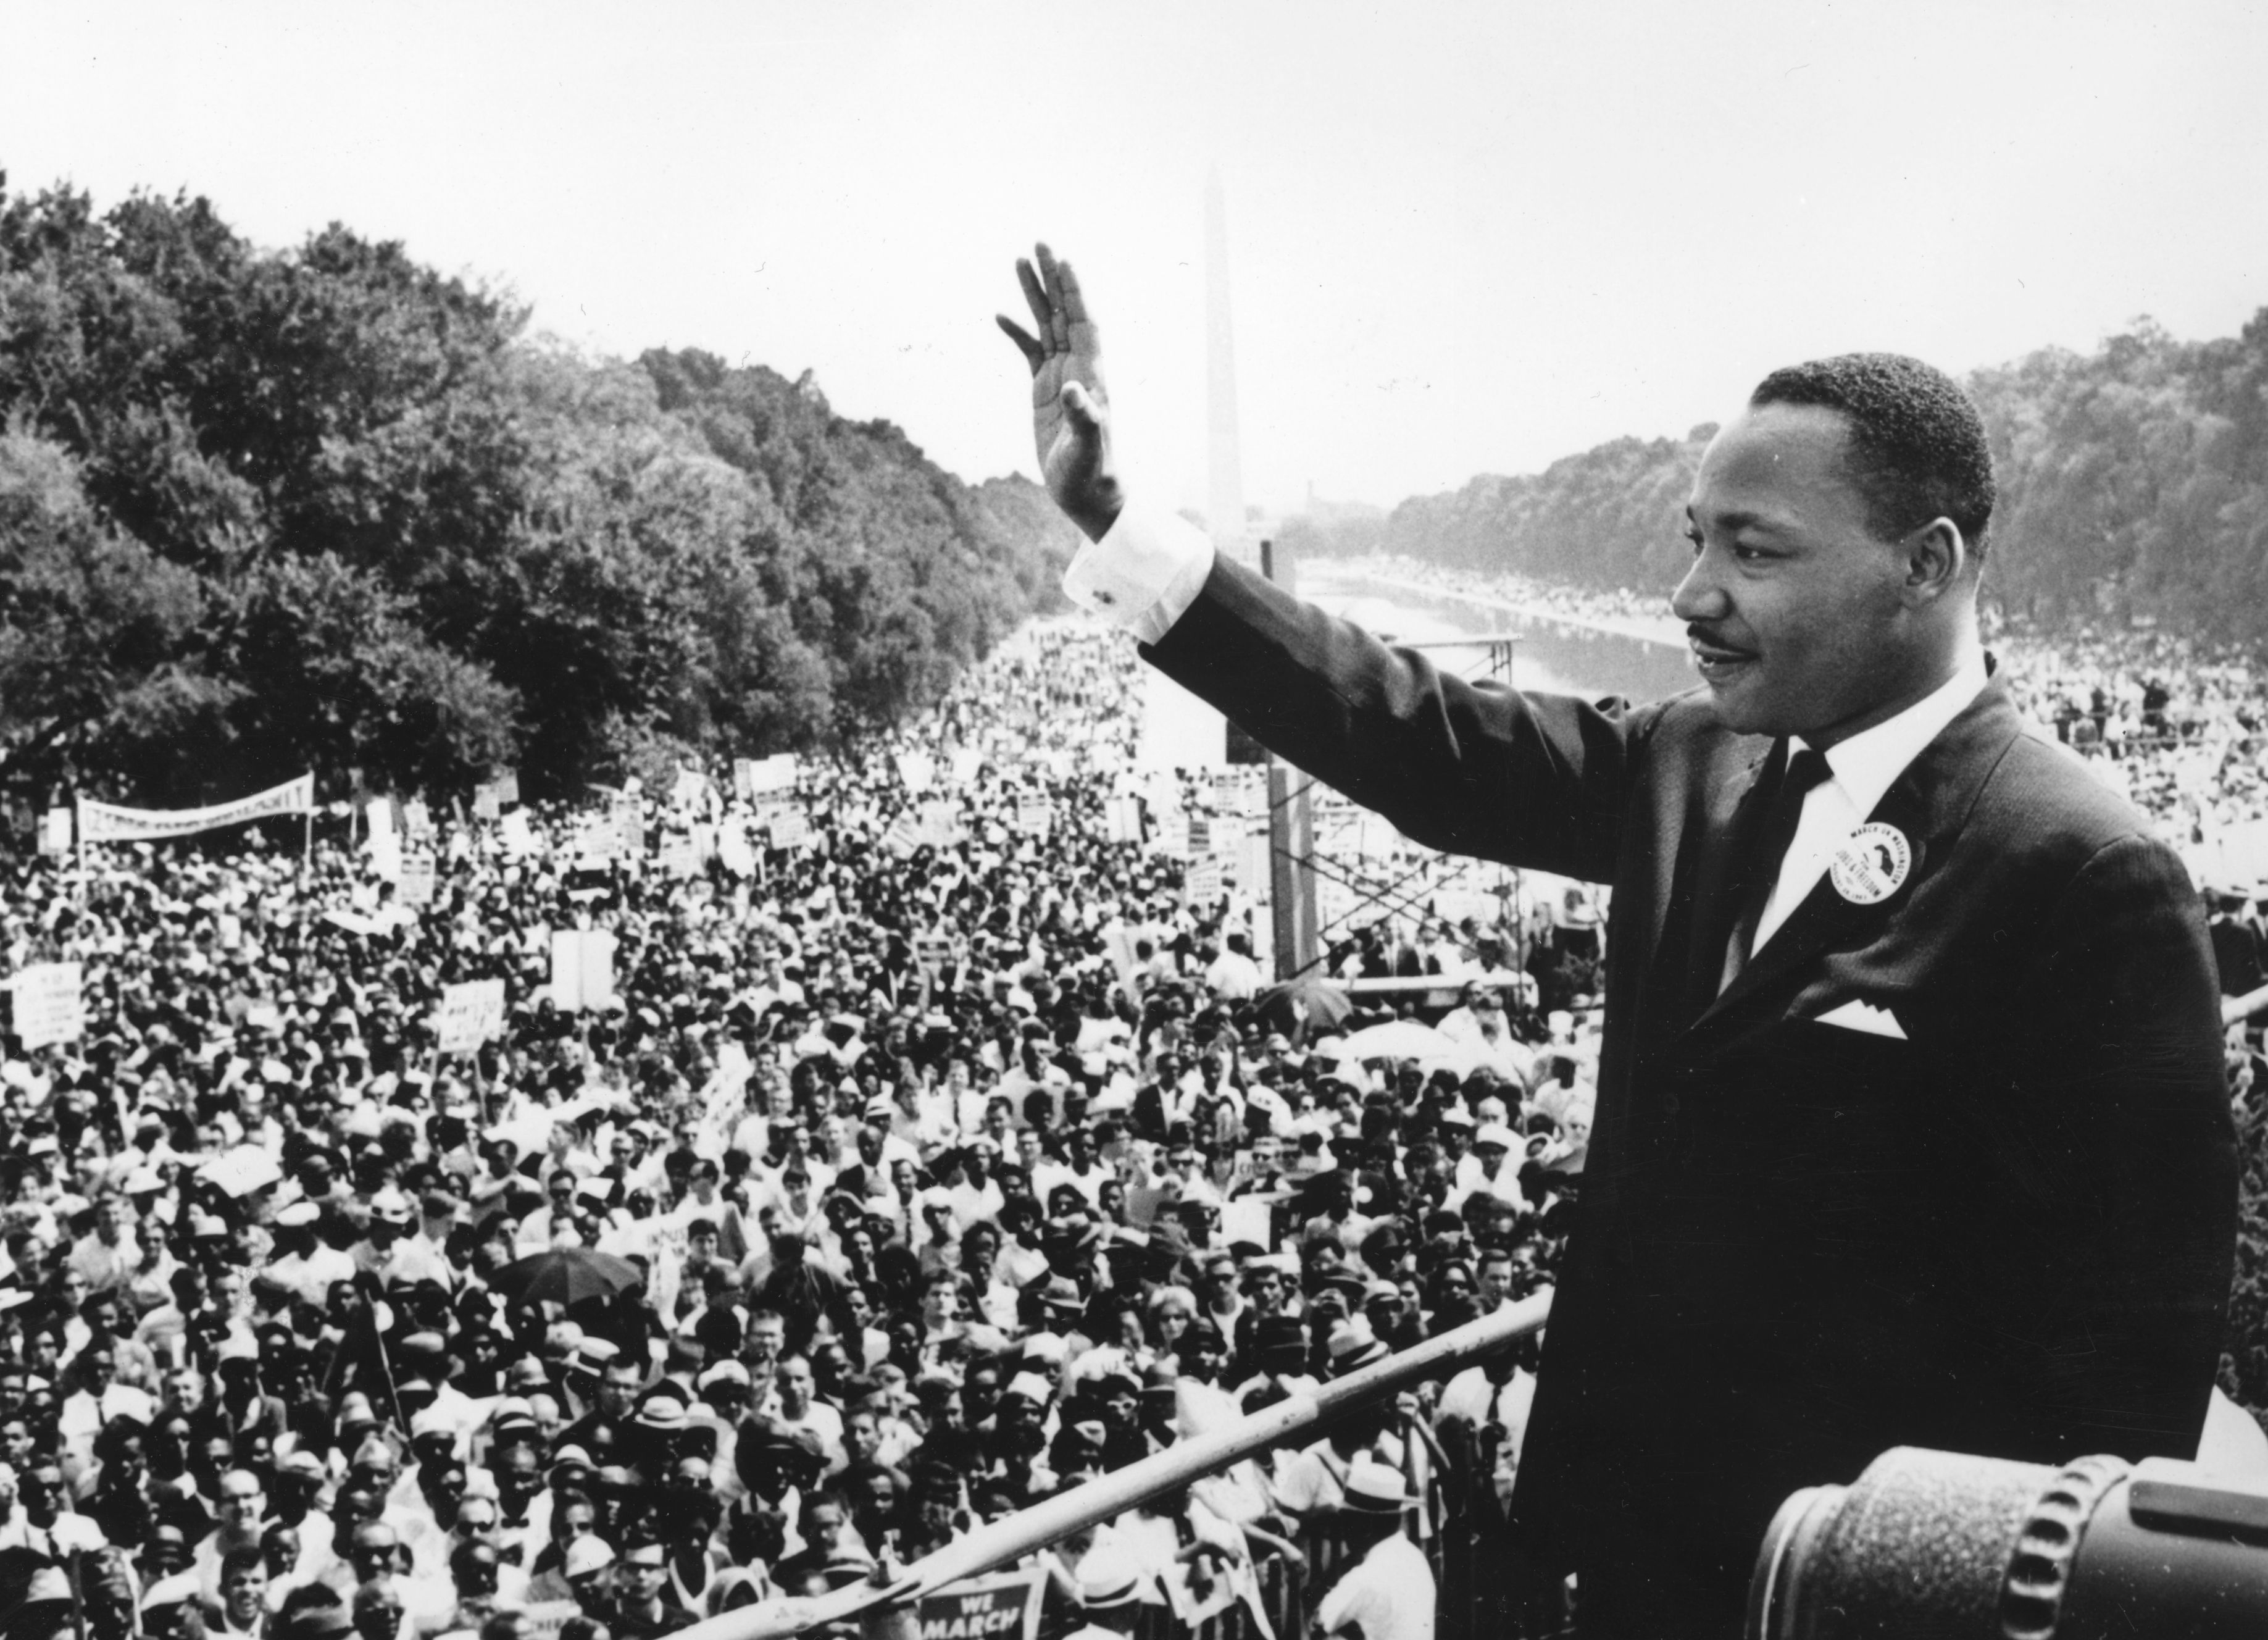 PHOTOS: The Legacy of Dr. Martin Luther King Jr